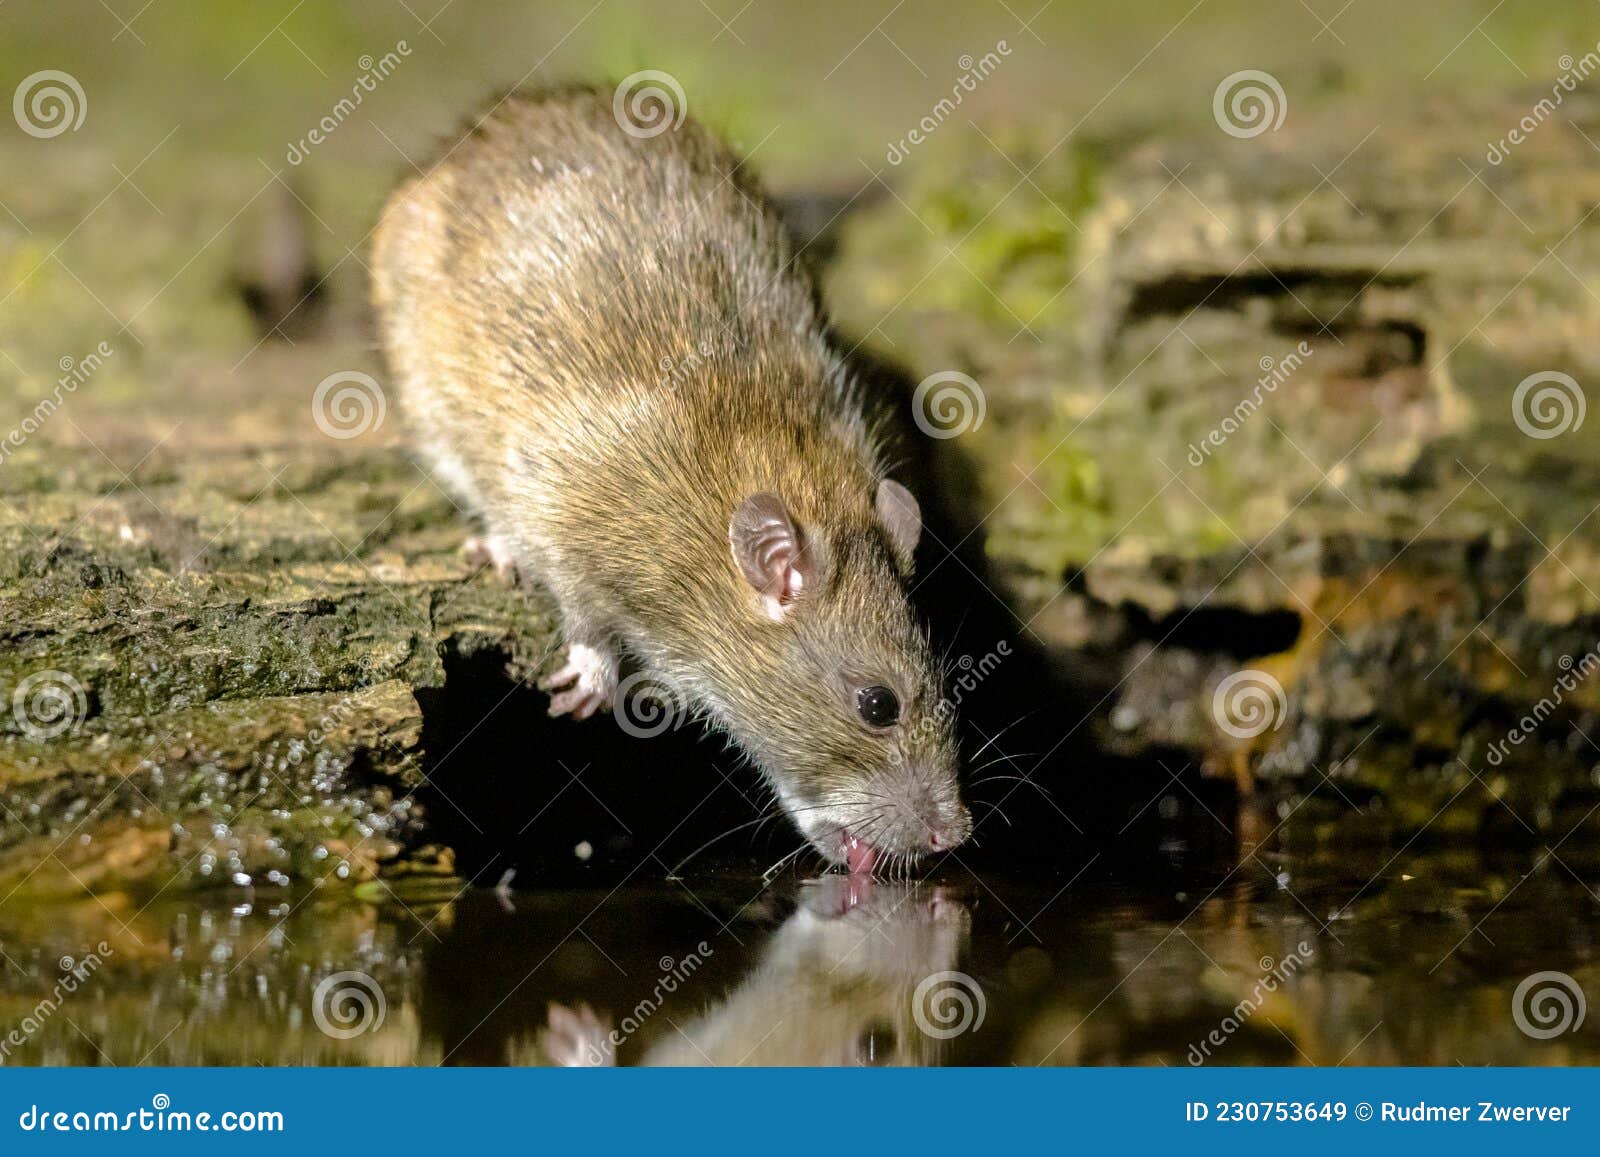 Brown Rat in Darkness Drinking on River Bank Stock Image - Image of cute, 230753649